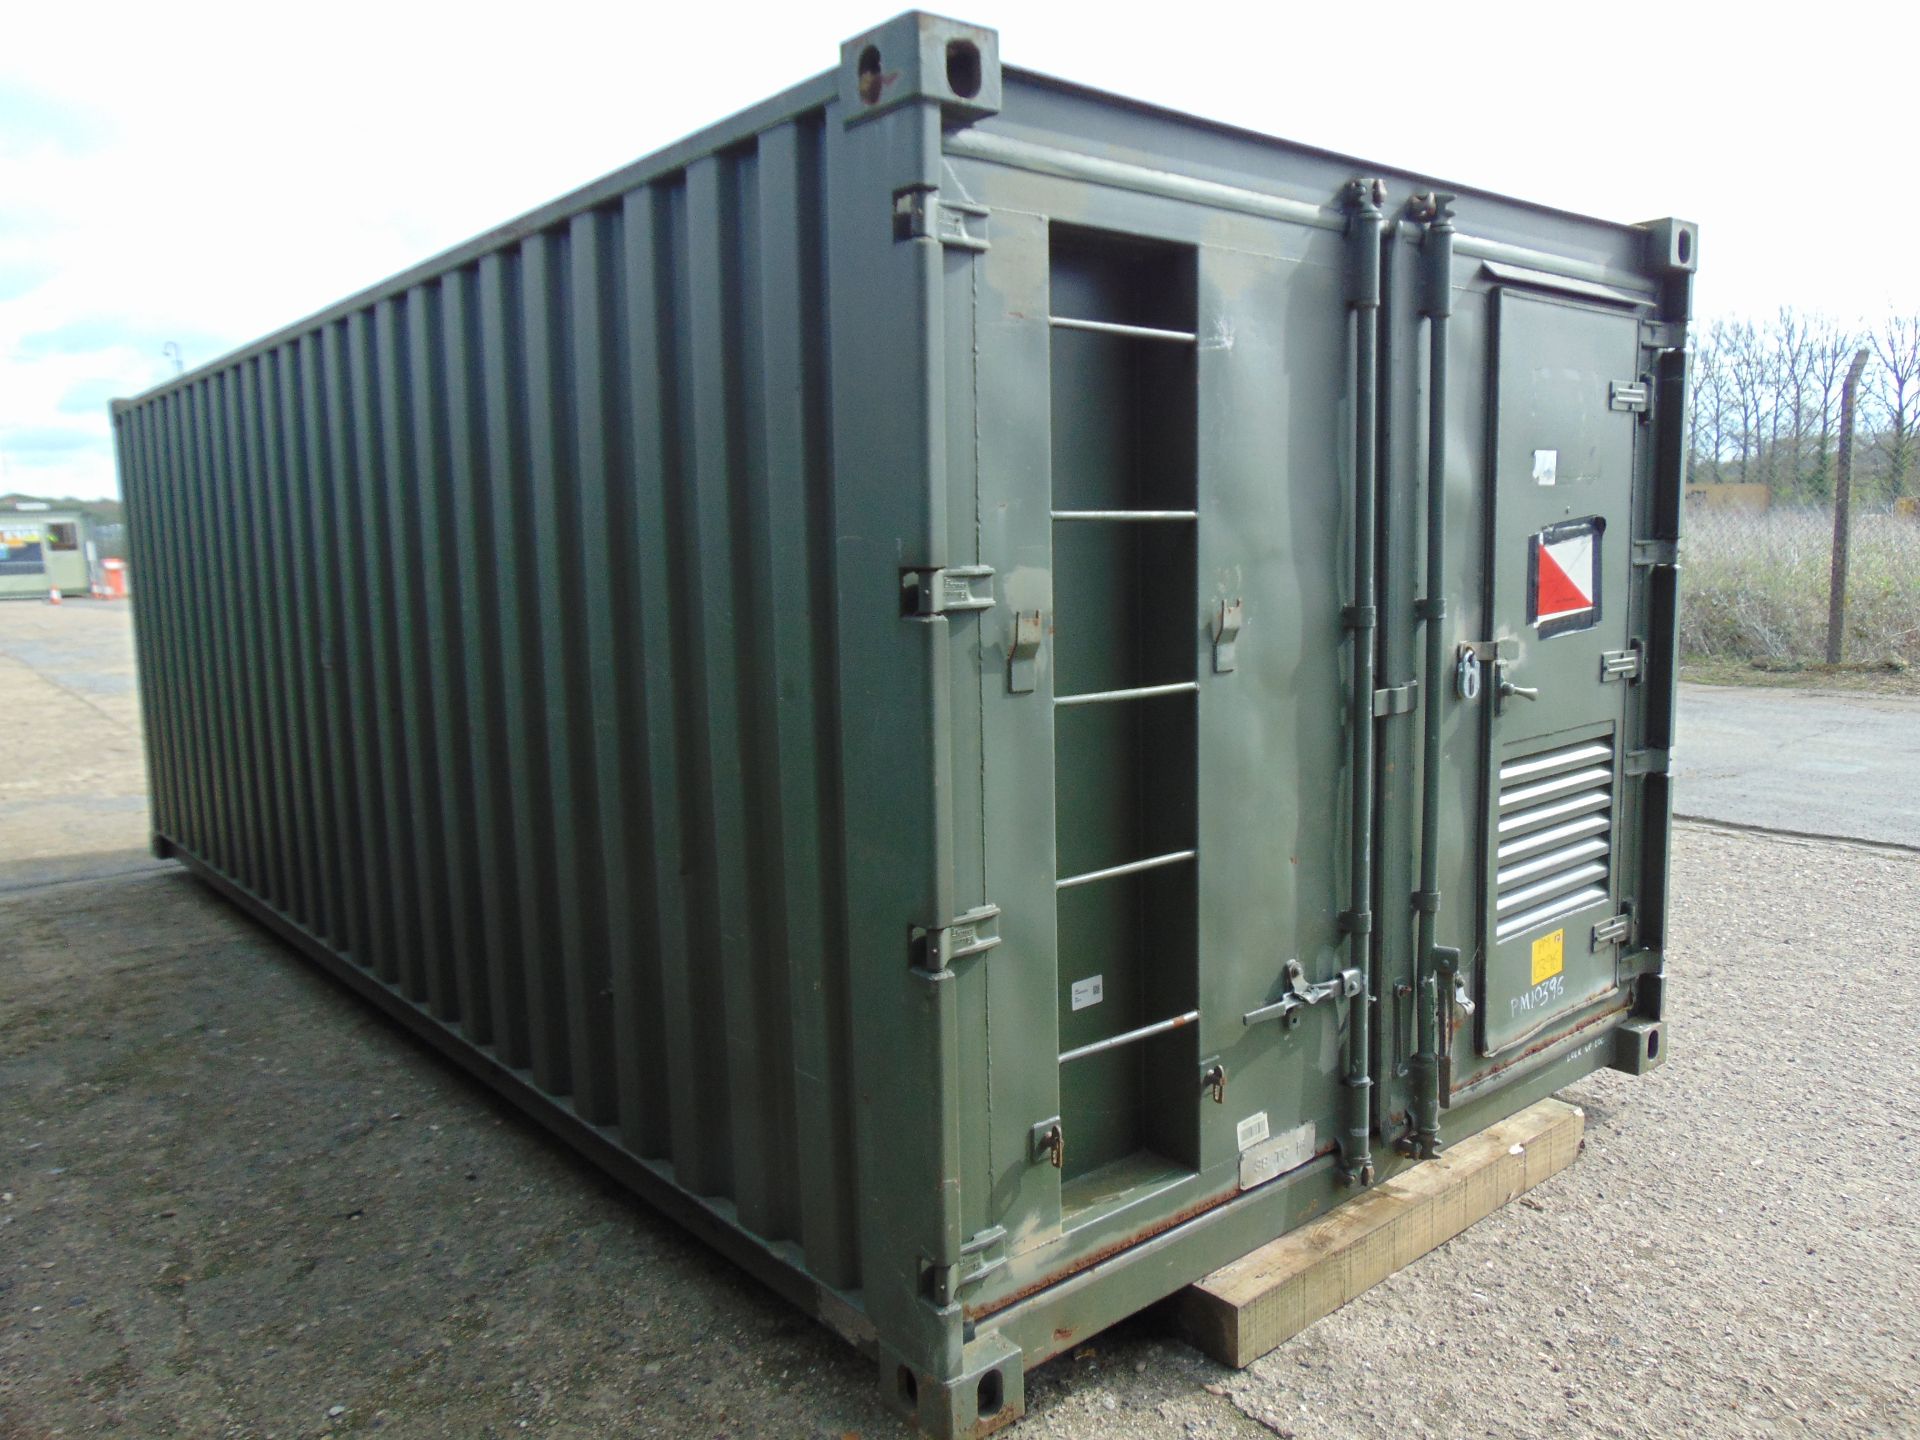 20ft ISO Shipping Container Complete with Fitted Internal Roller Racking Storage System - Image 3 of 8